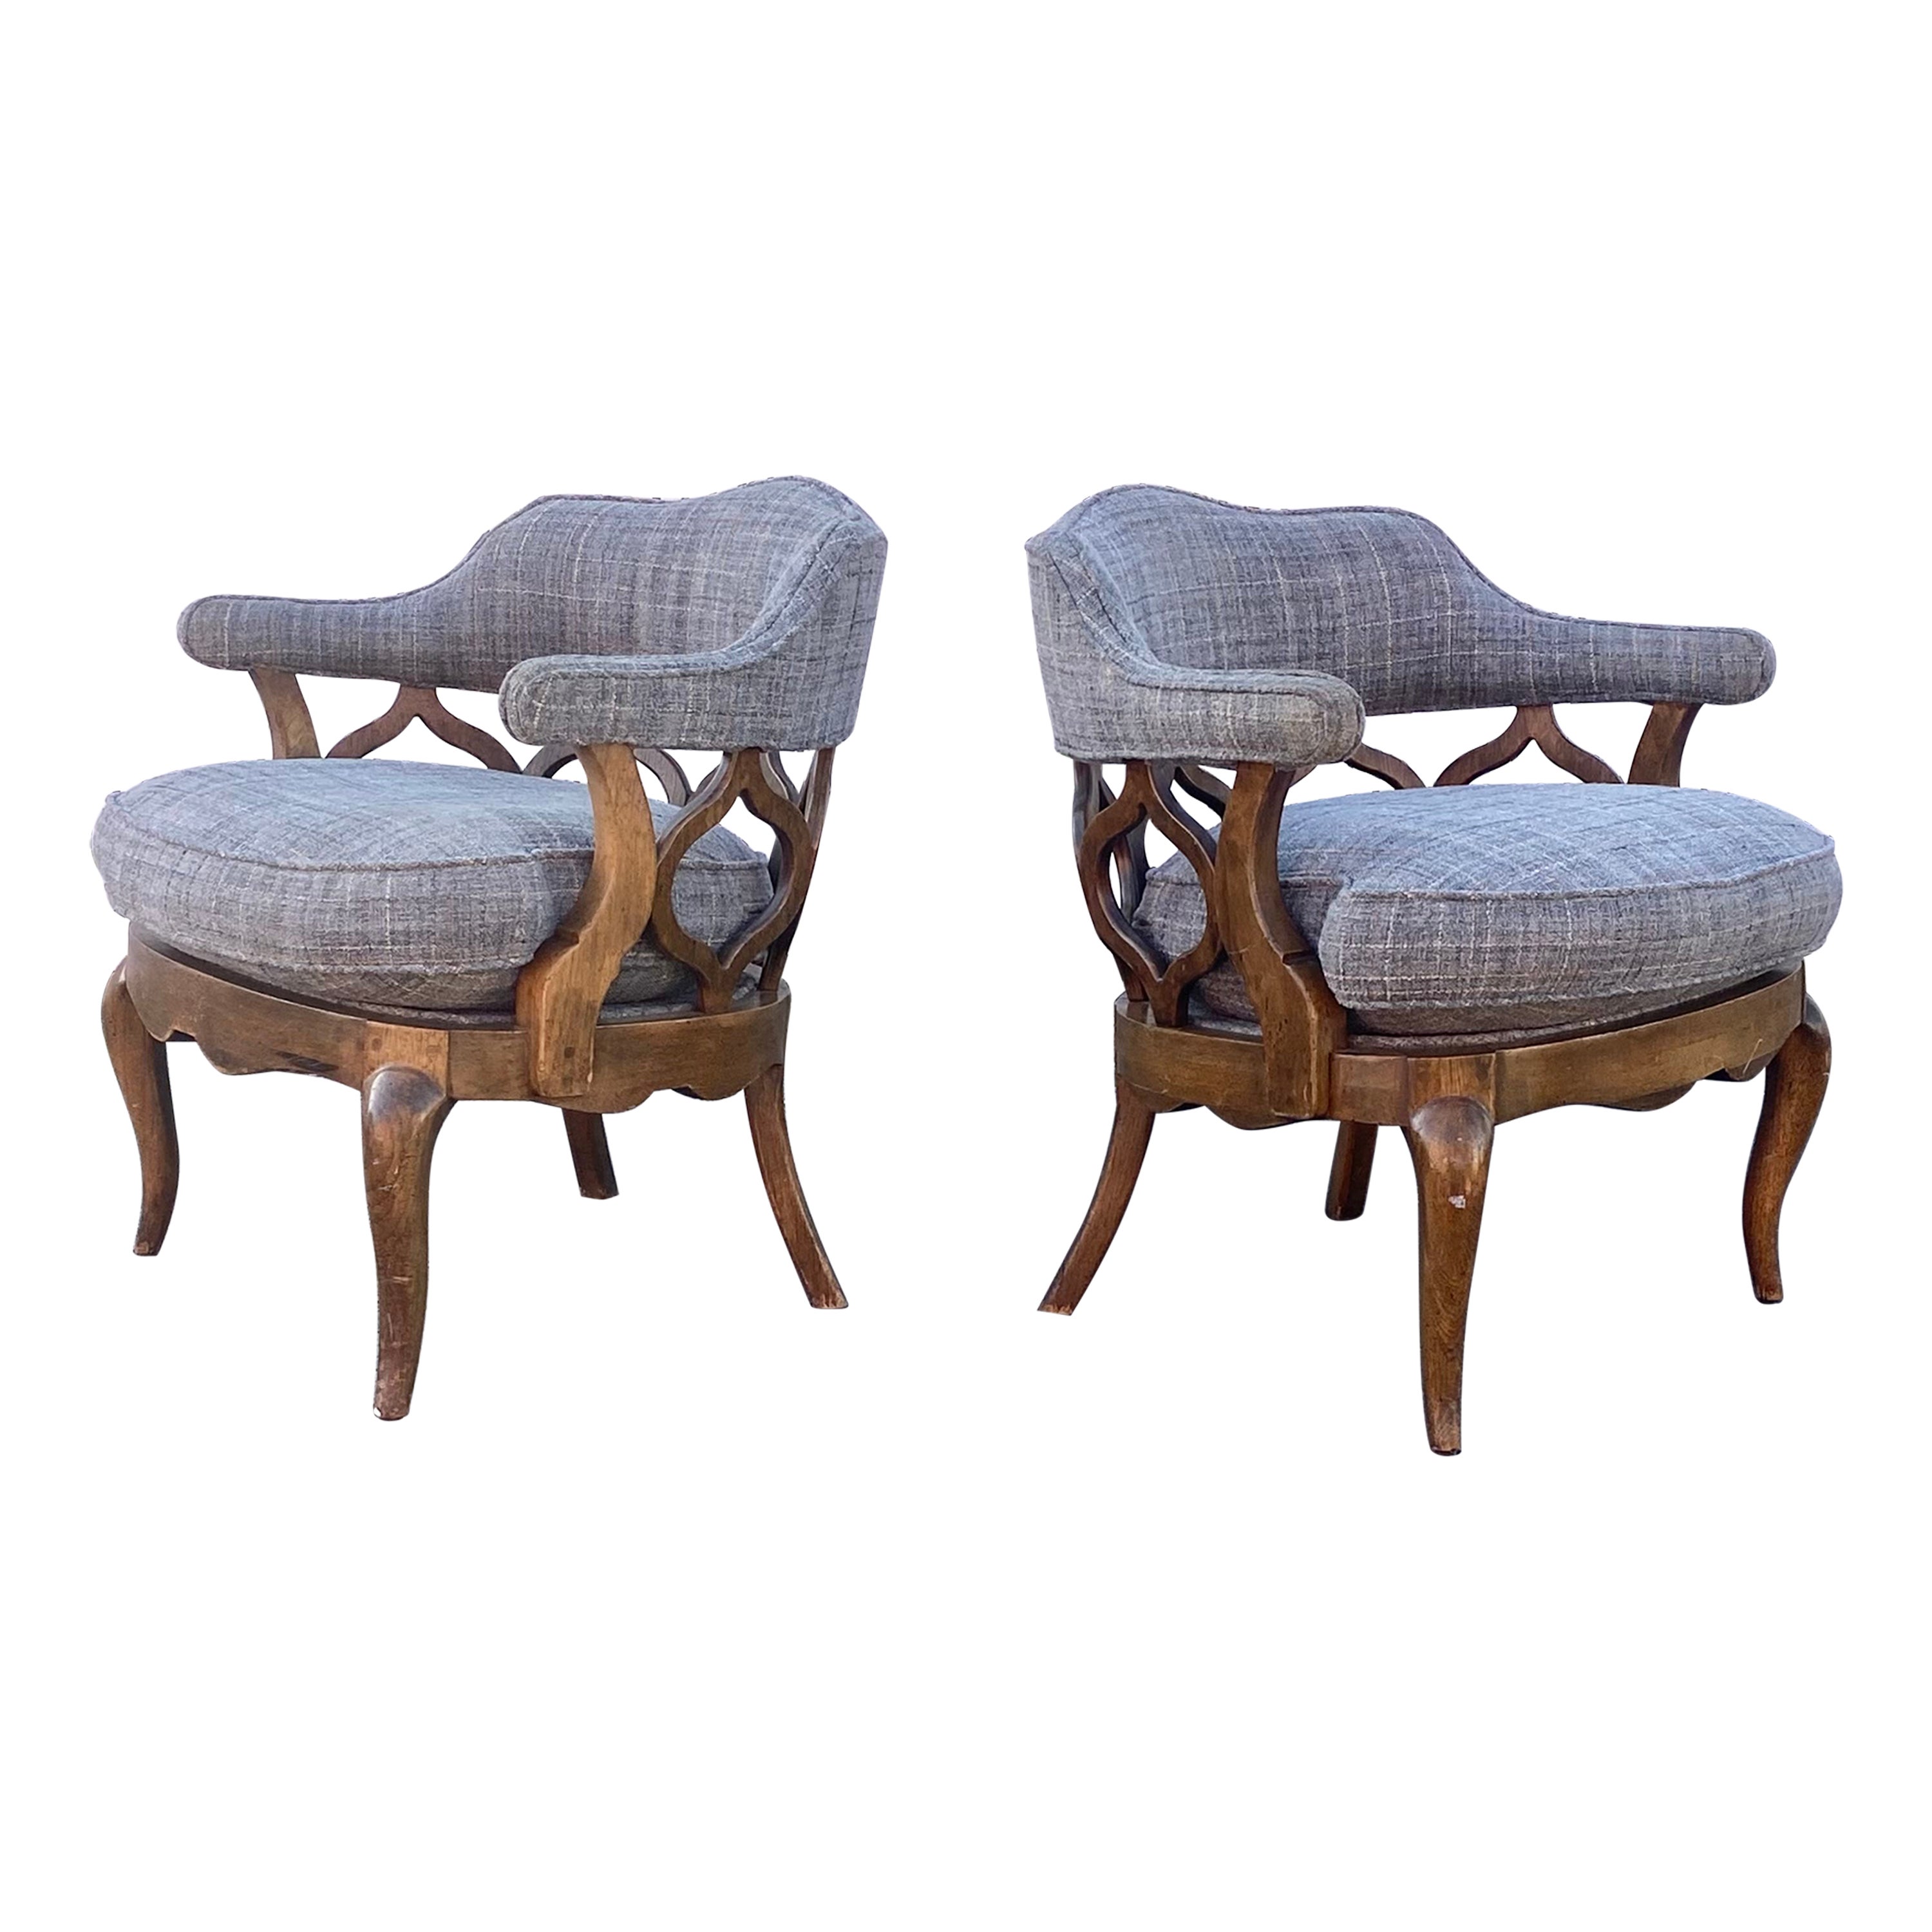 1970s  Mid Century Sculptural Curved Barrel Tweed Wood Chairs, Set of 2 For Sale